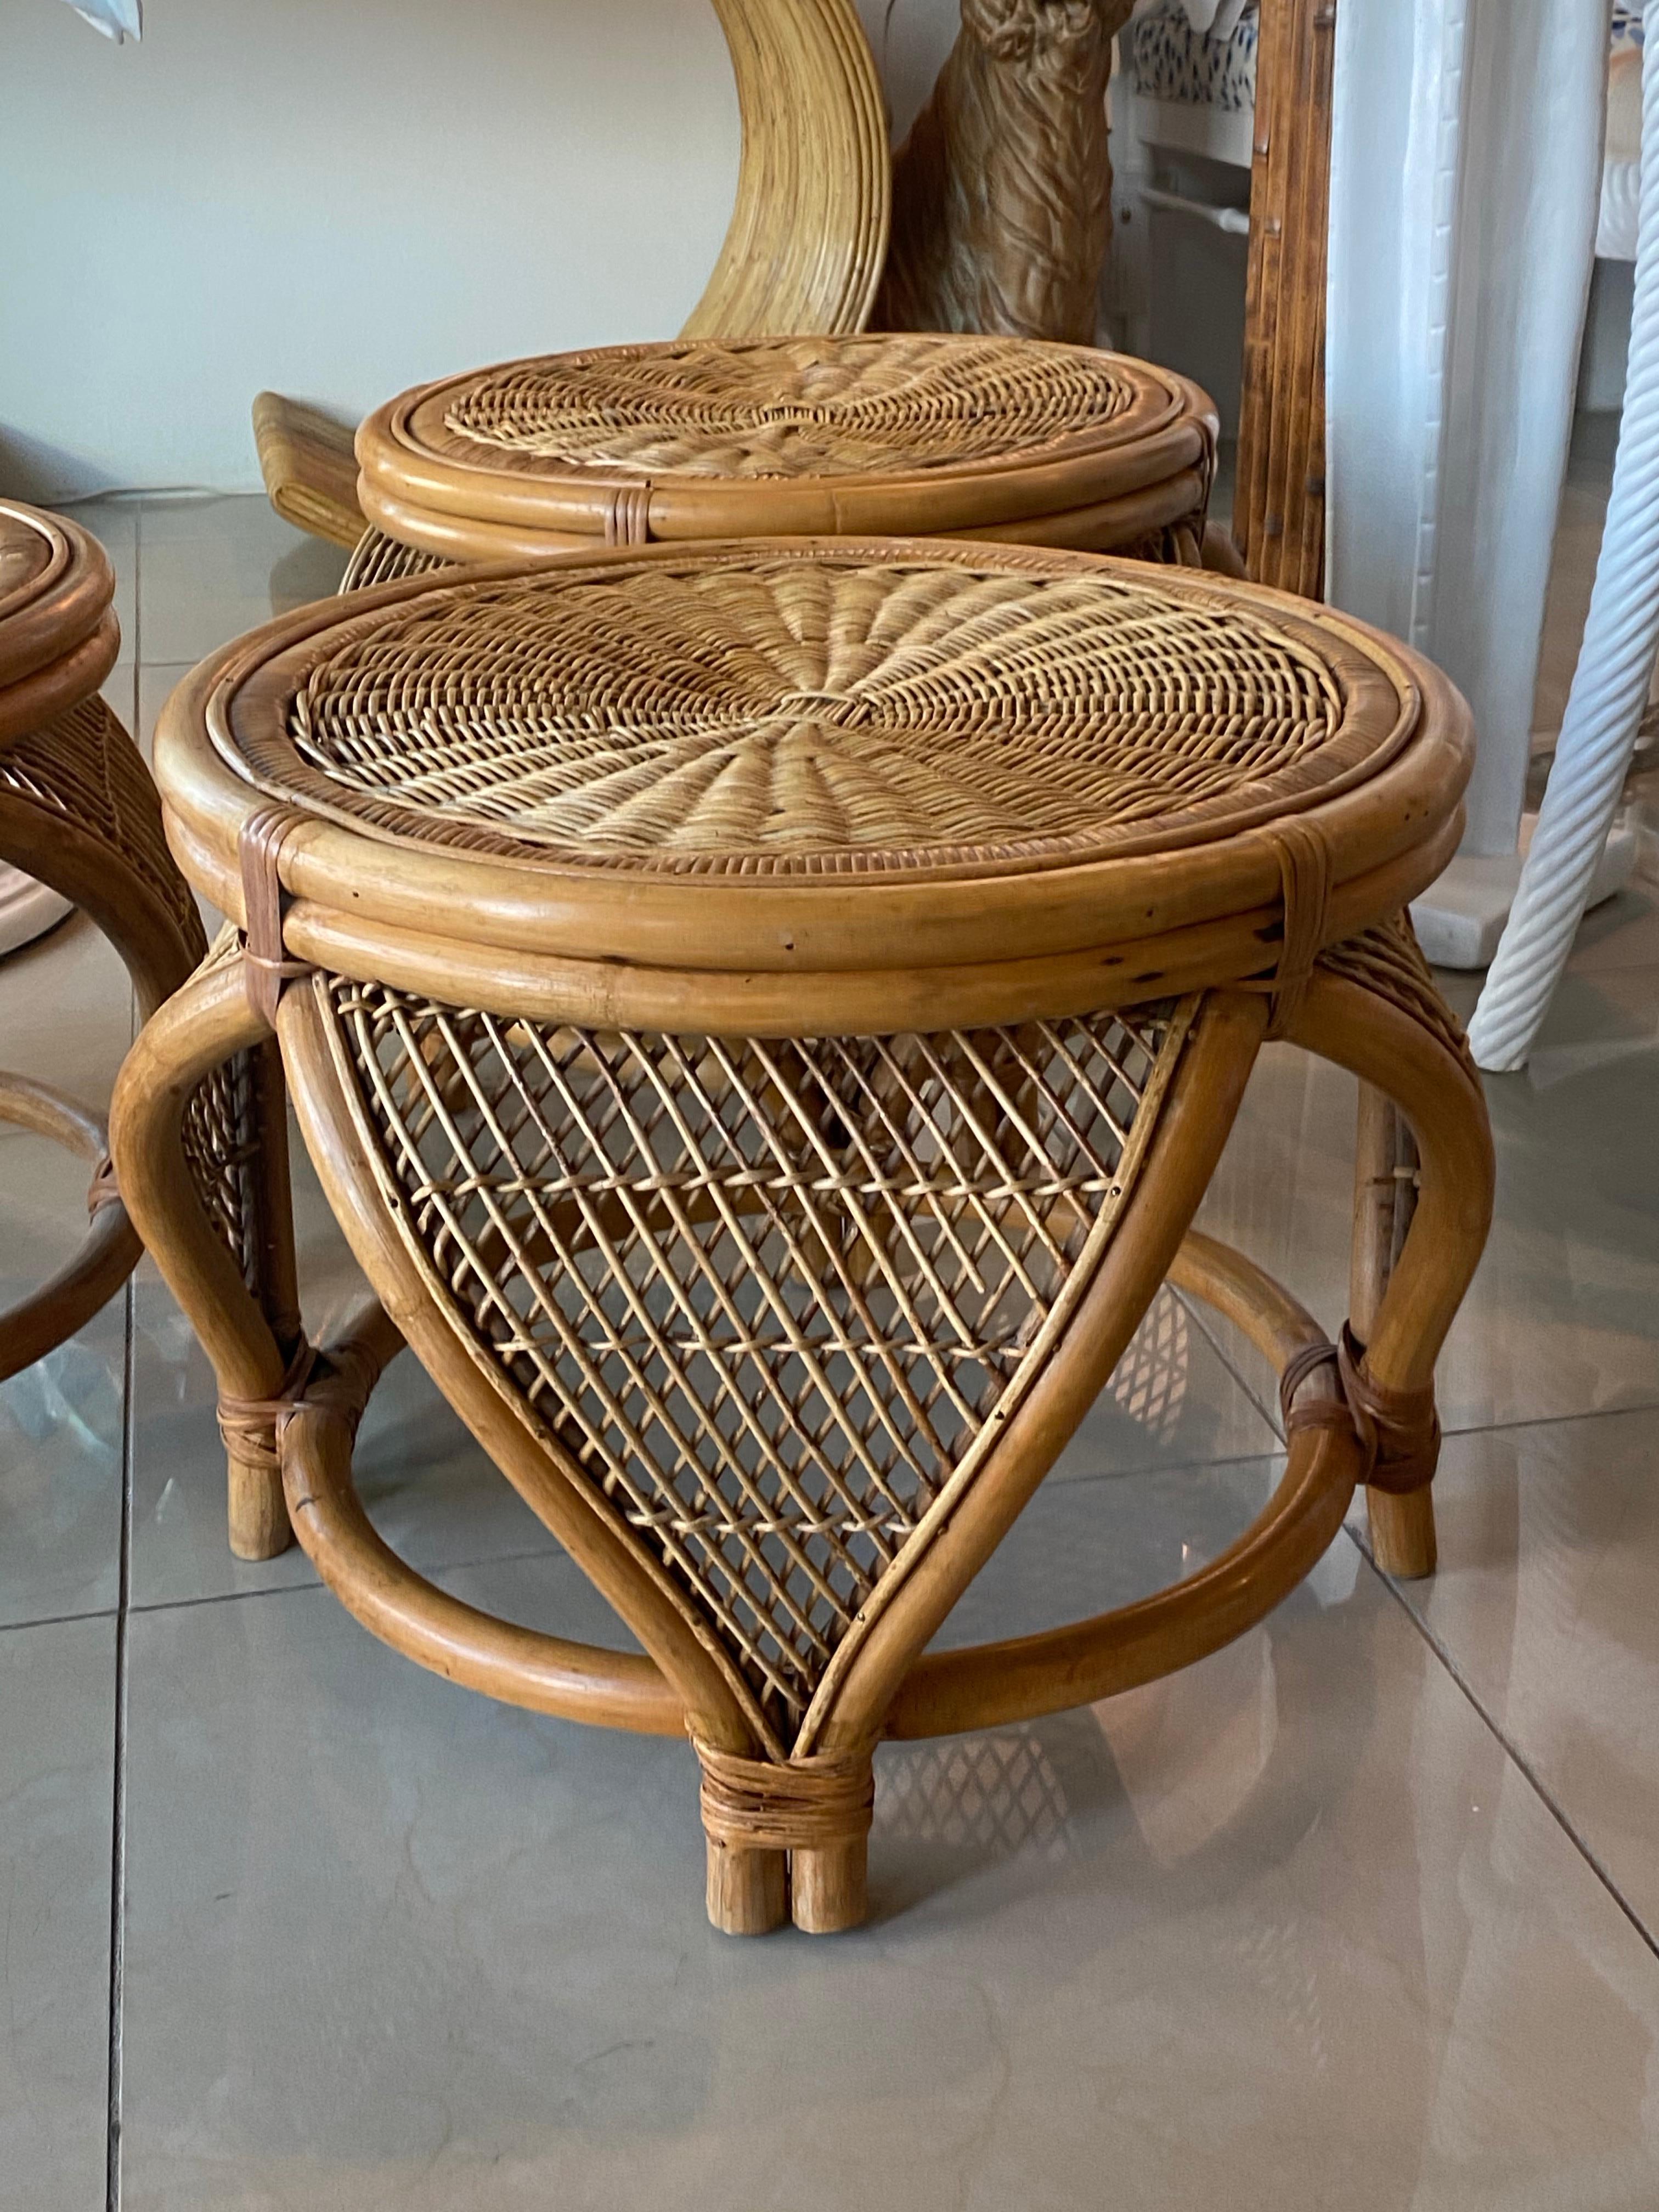 American Vintage Set of 3 Rattan & Wicker Moroccan Stools Benches Ottomans Footstools